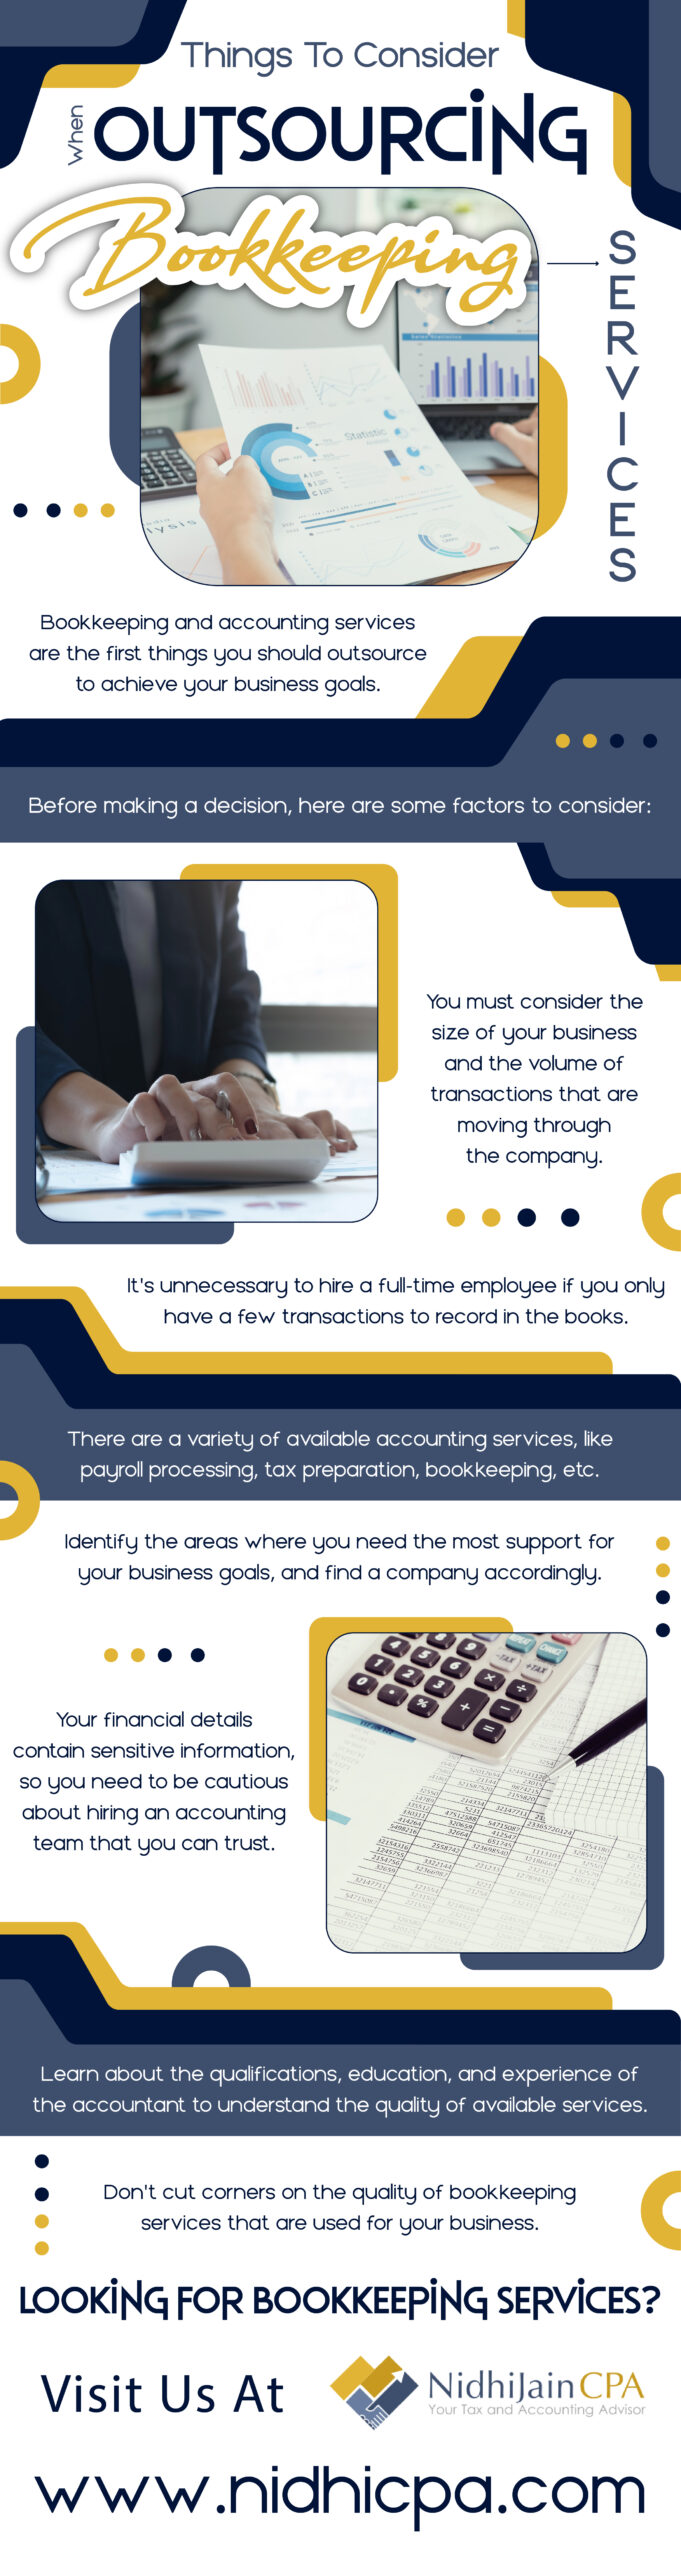 Things To Consider When Outsourcing Bookkeeping Services